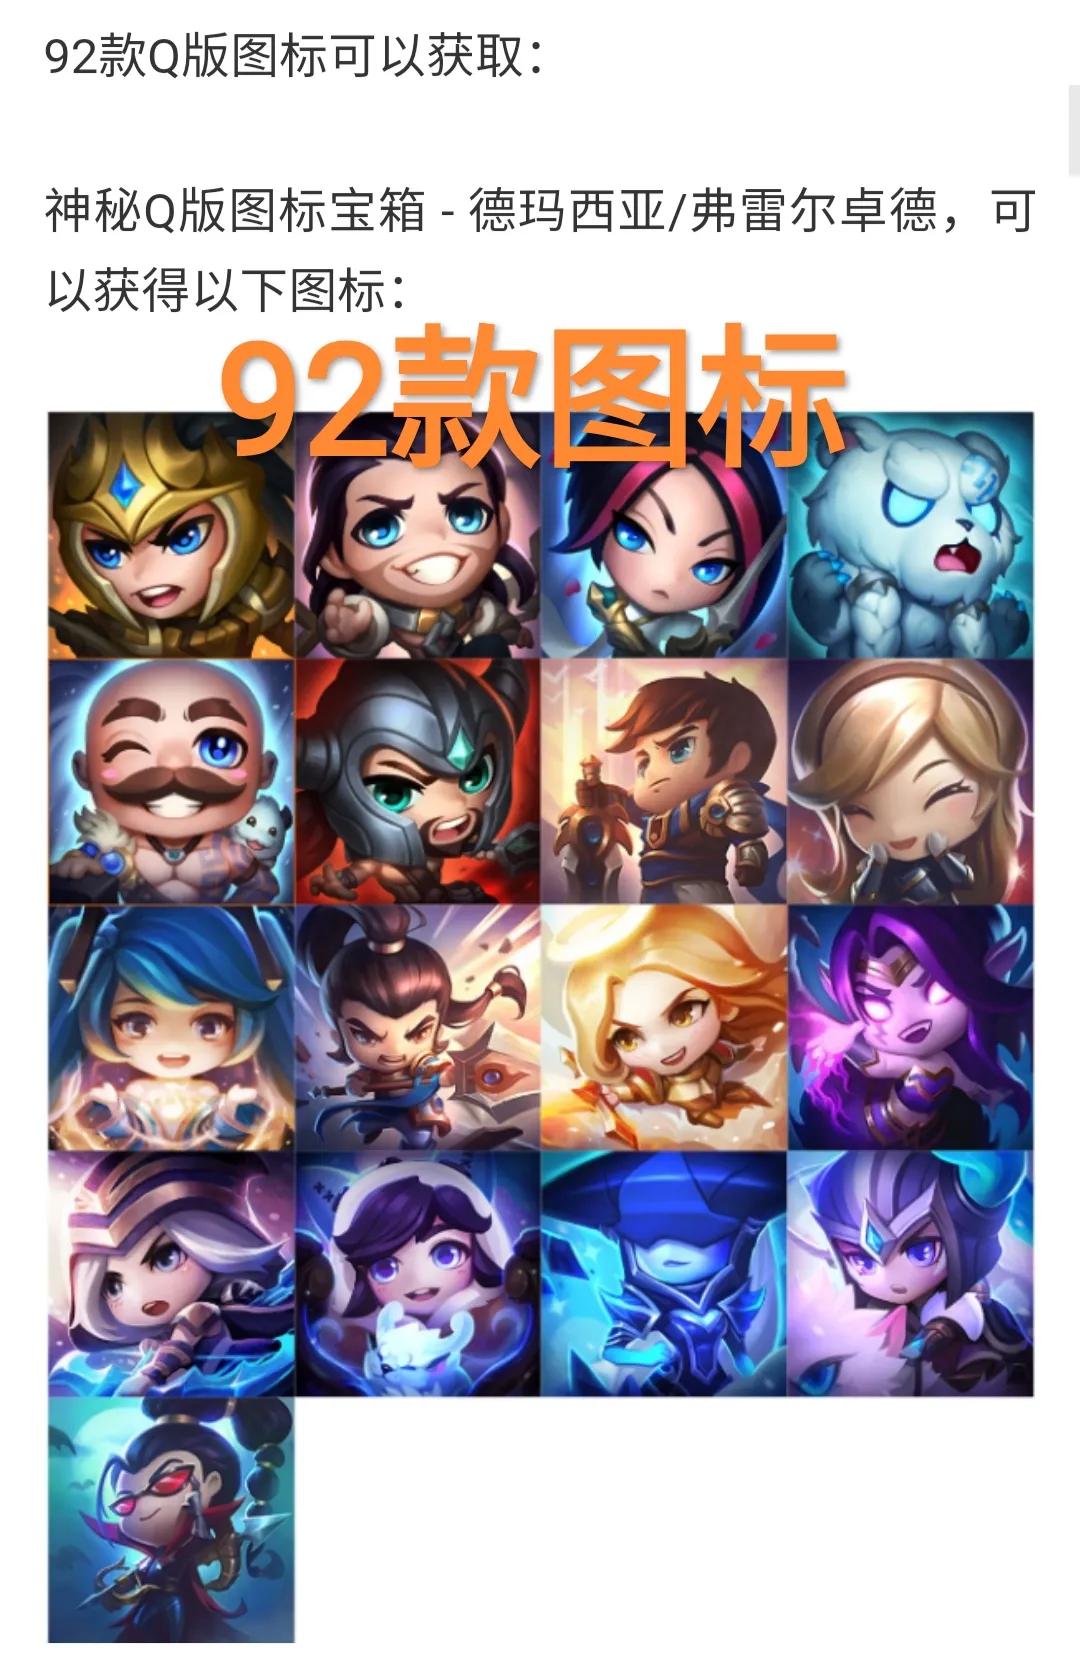 LOL Blue Essence Store is open!"92 Qversion icons and 204 new skins